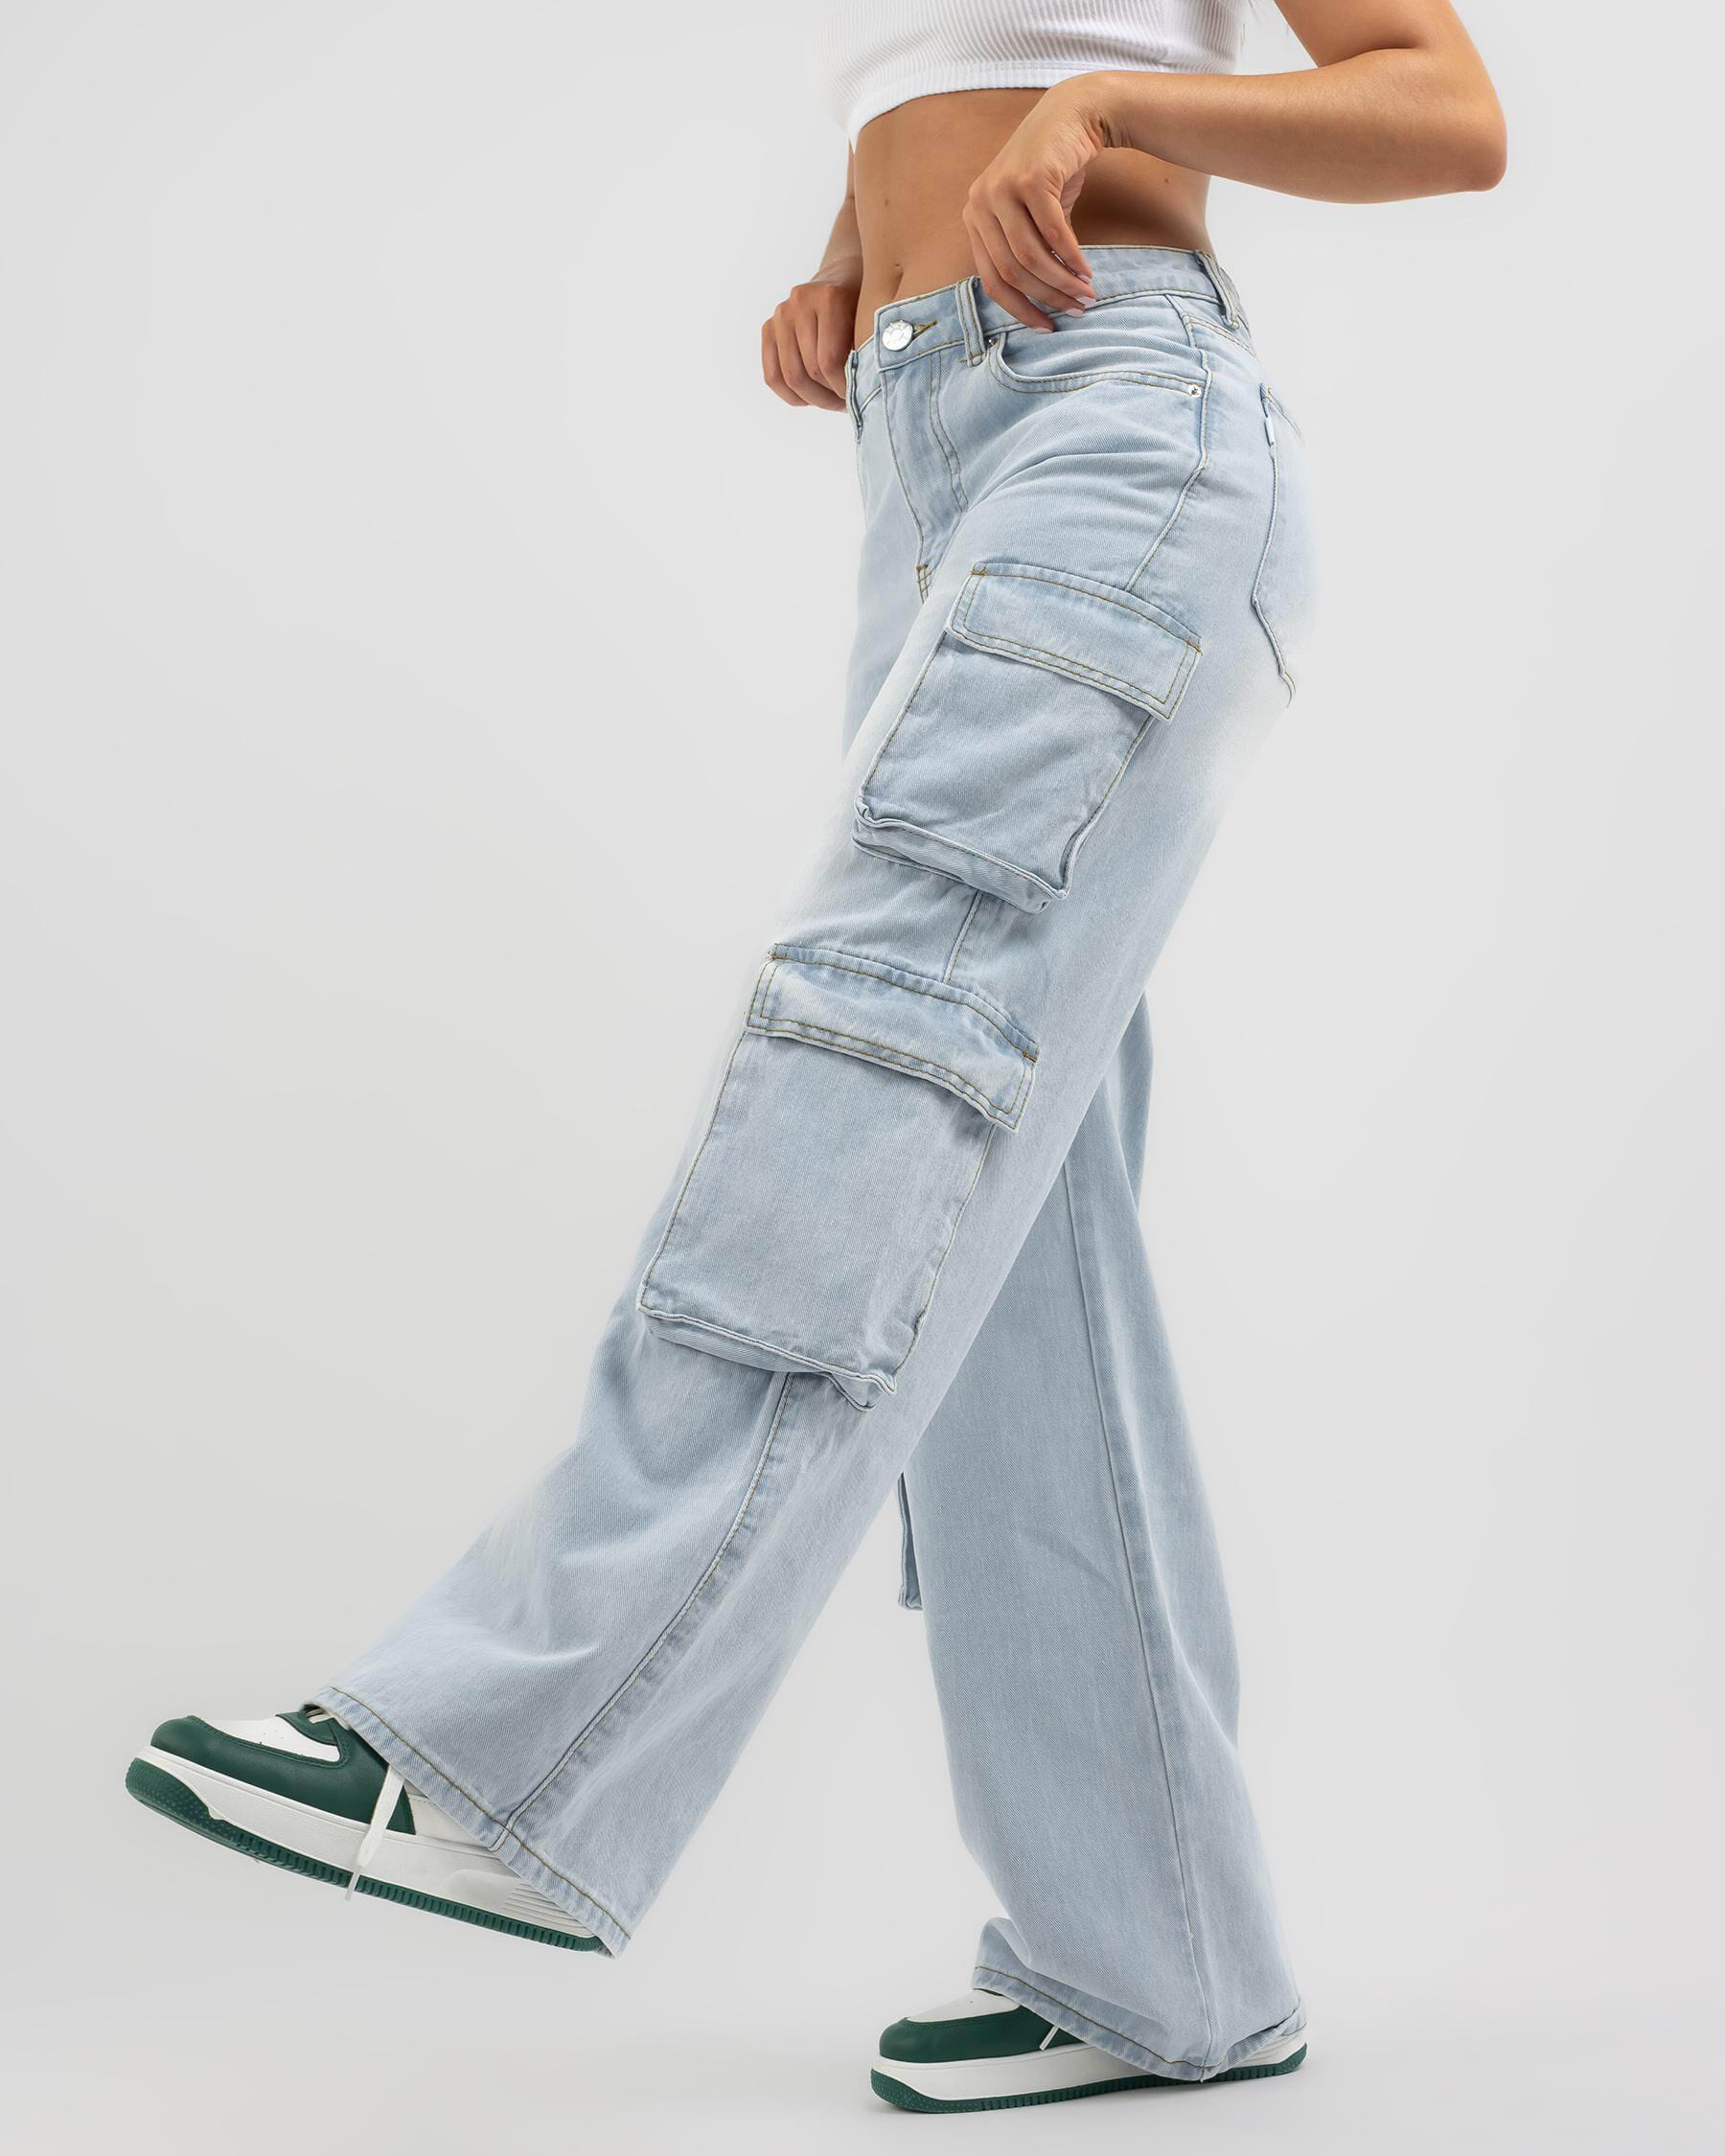 Buy Flex and Move womens cargo pant by Bisley Womens online  she wear